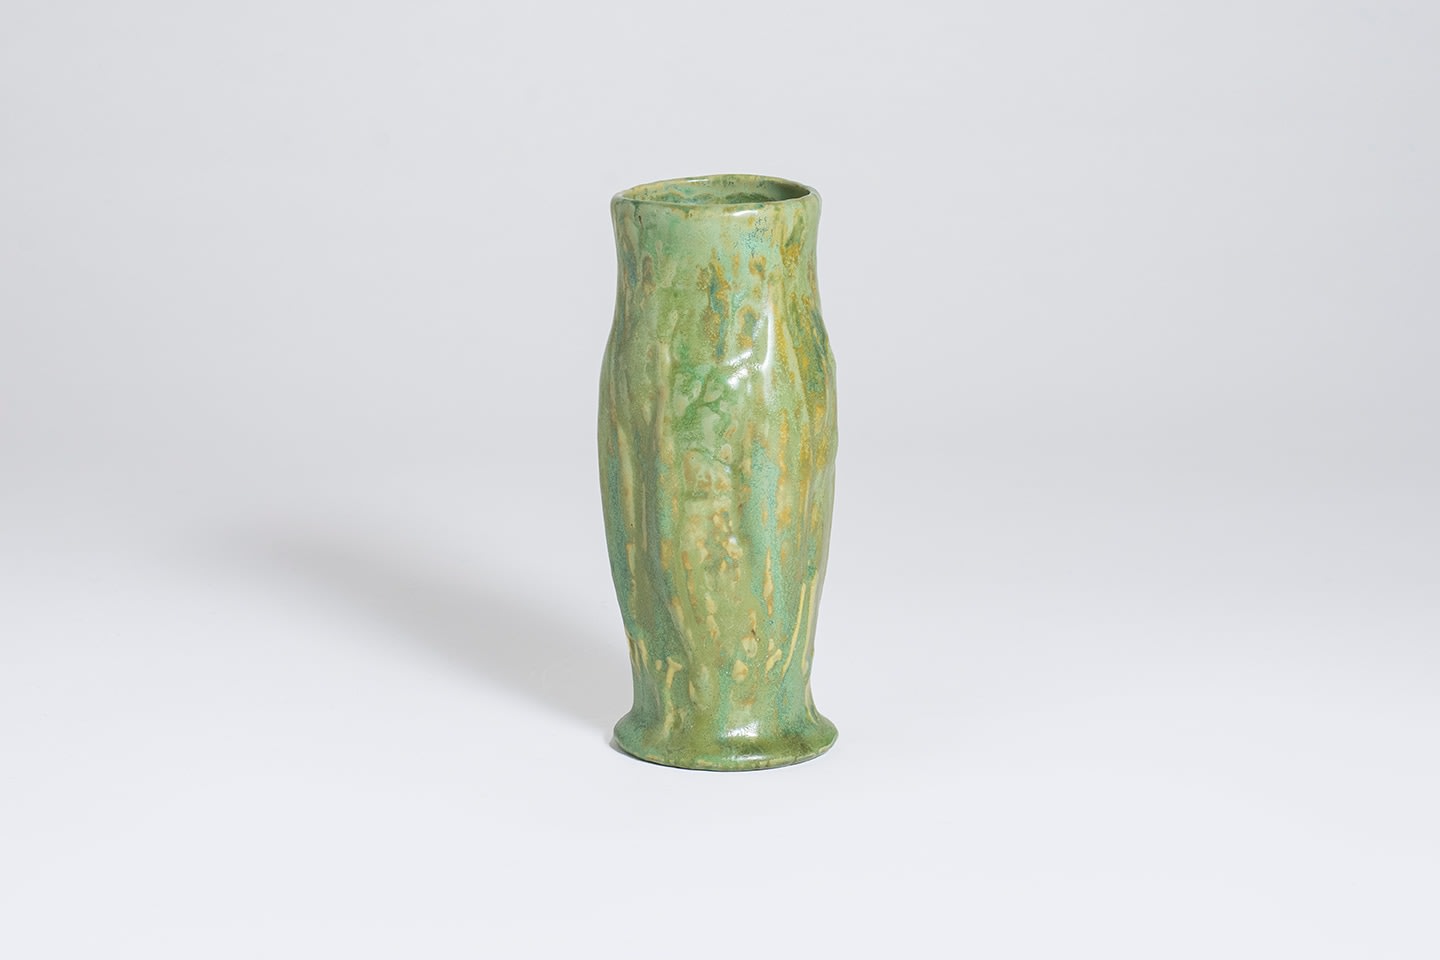 a cabinet vase with variegated green-yellow glaze, of cylindrical form with slight bulge at the center, with indistinct naturalistic relief decoration depicting a milkweed pod with seeds